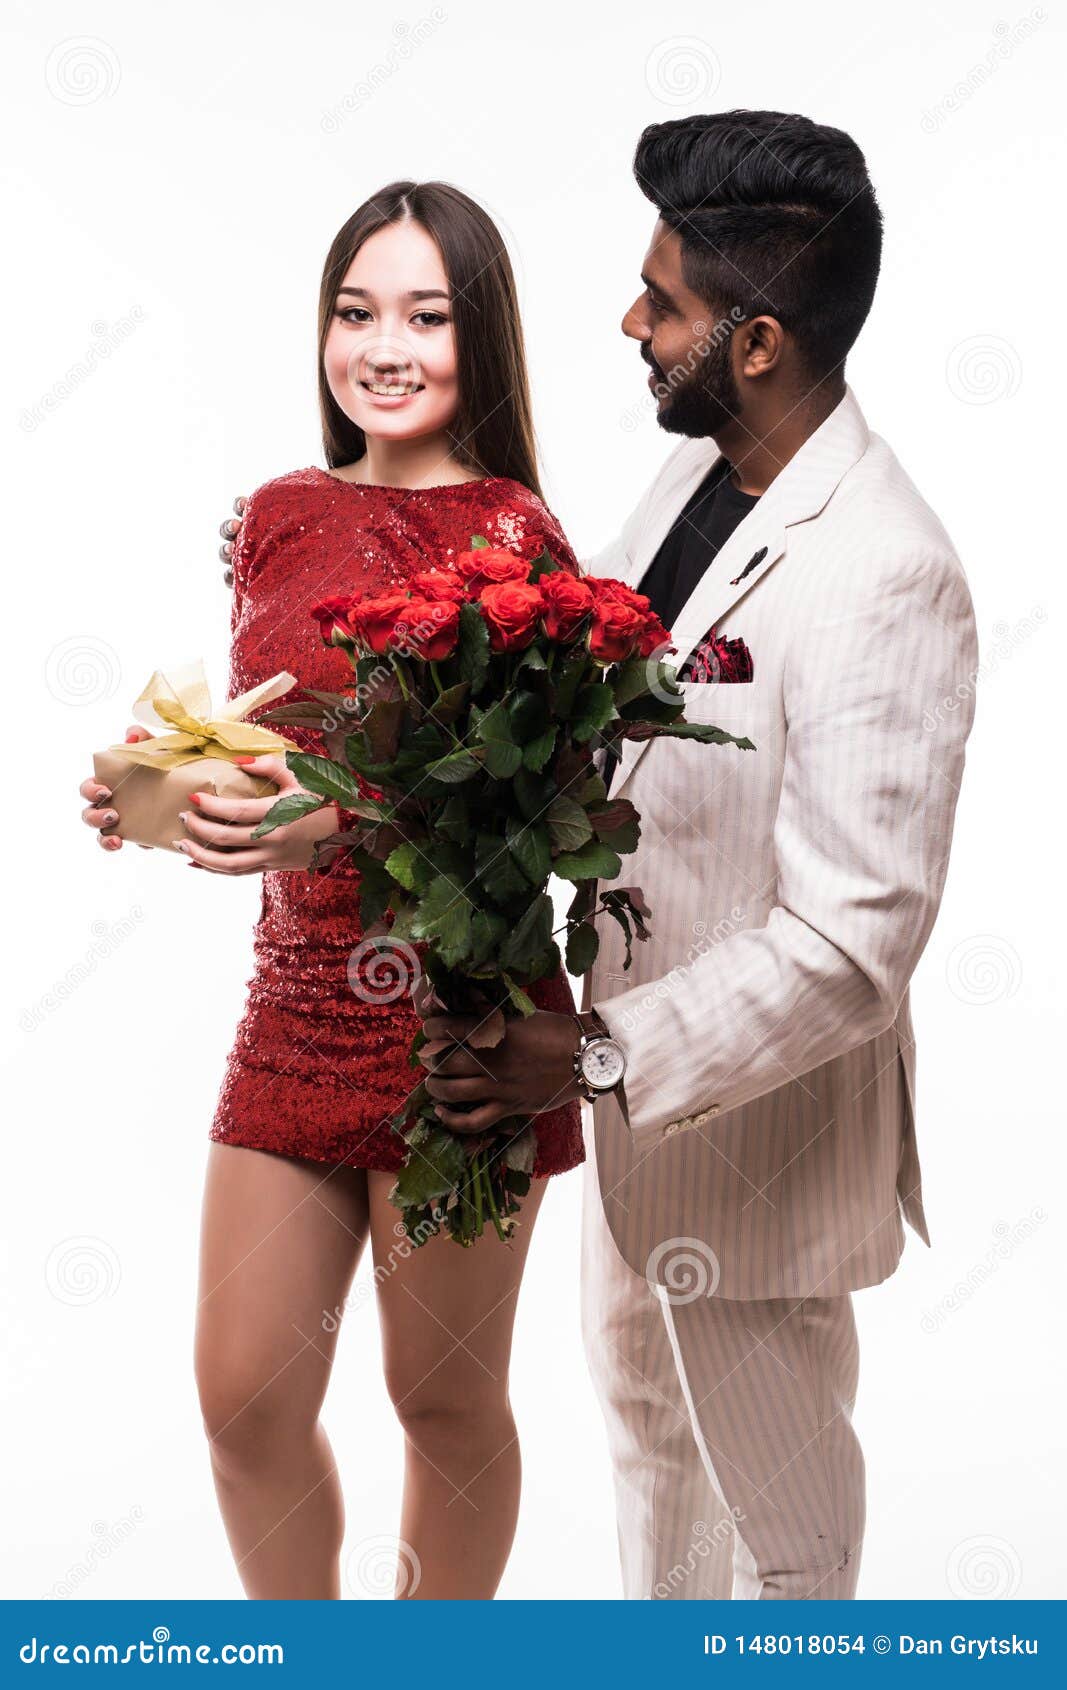 https://thumbs.dreamstime.com/z/beautiful-romantic-asian-couple-young-asian-women-dress-holding-red-roses-handsome-indian-men-suit-love-isolated-148018054.jpg